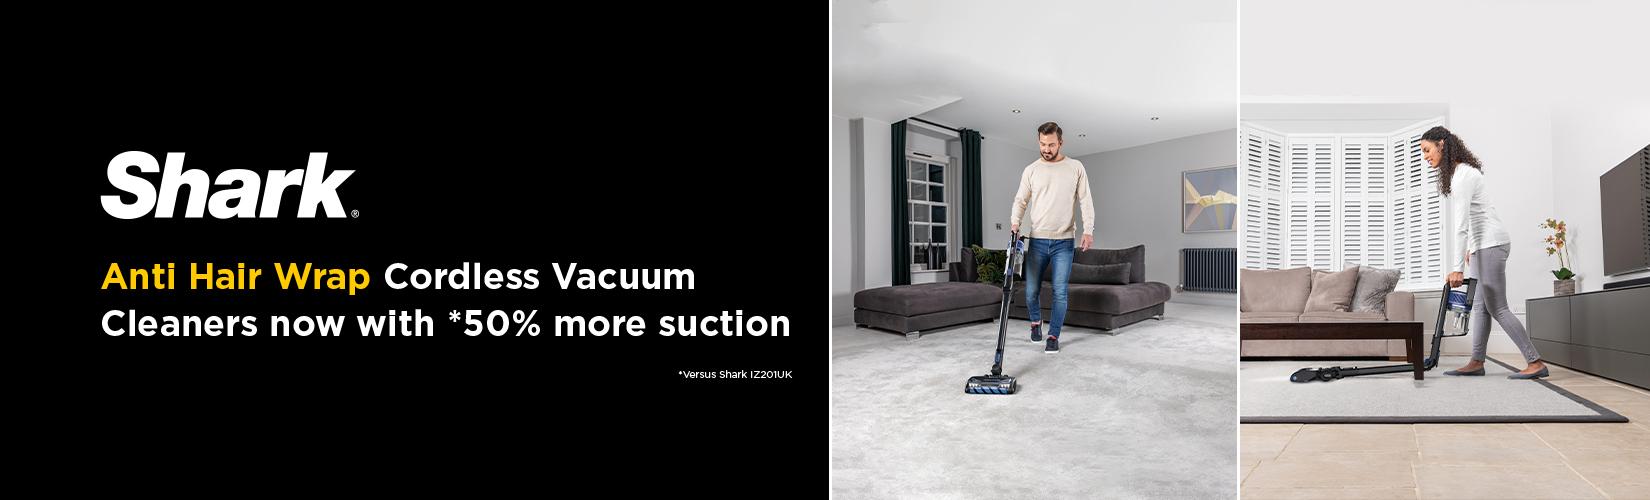 Shark. Anti hair wrap cordless vacuum cleaners now with 50% more suction.